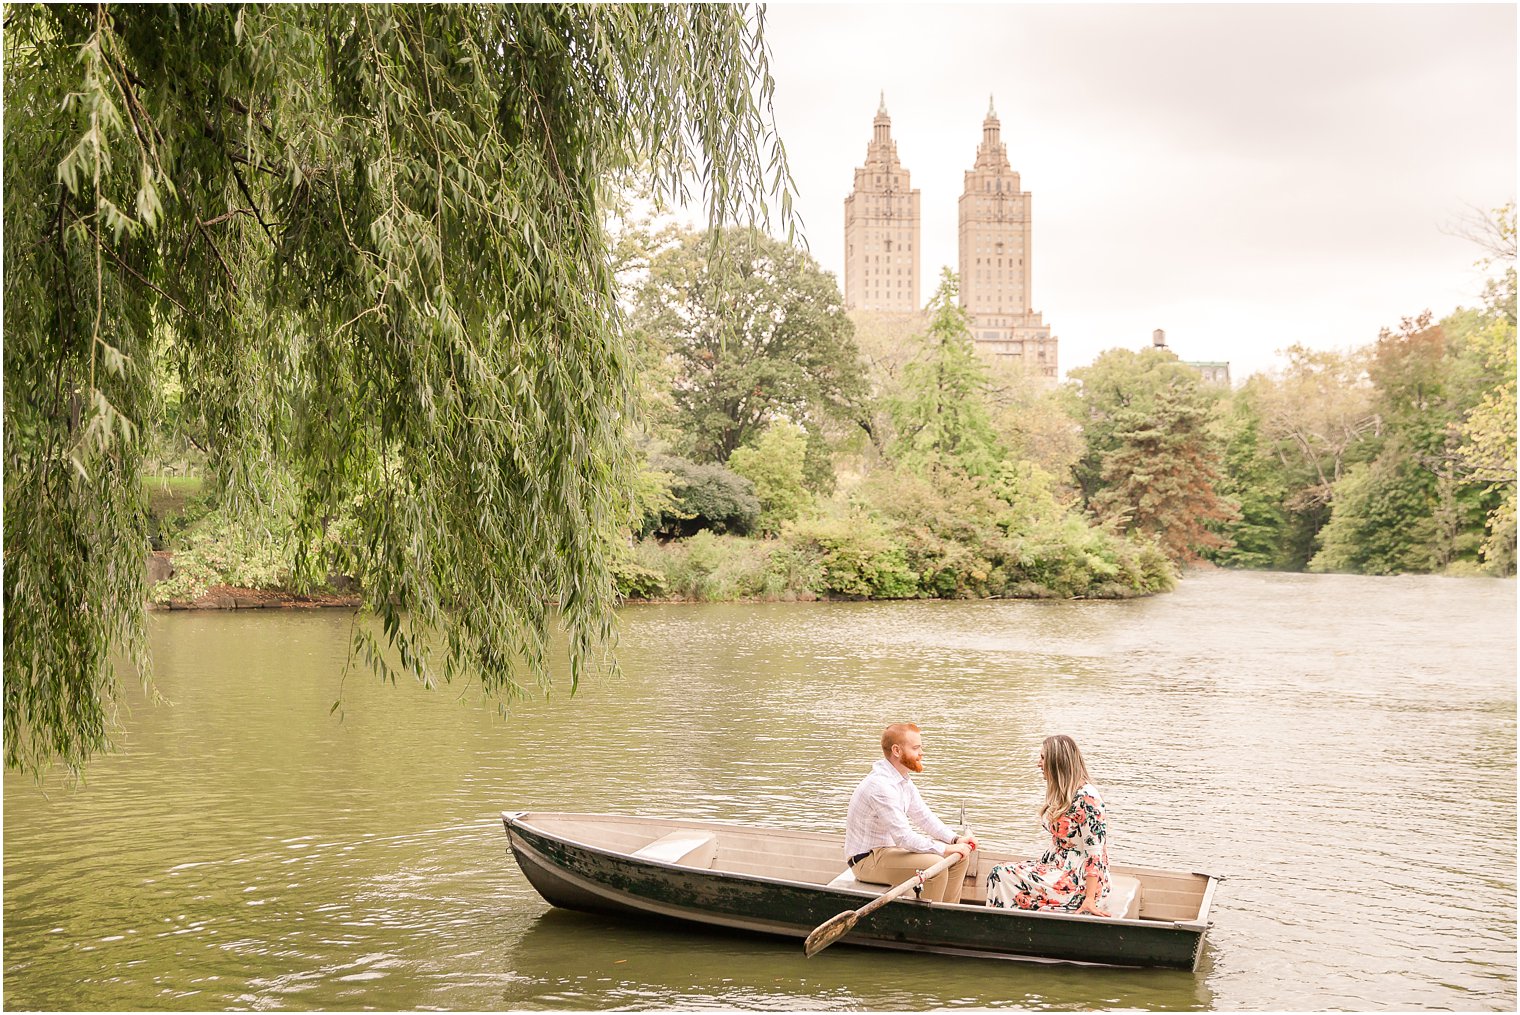 Couple on a boat under a willow tree in Central Park